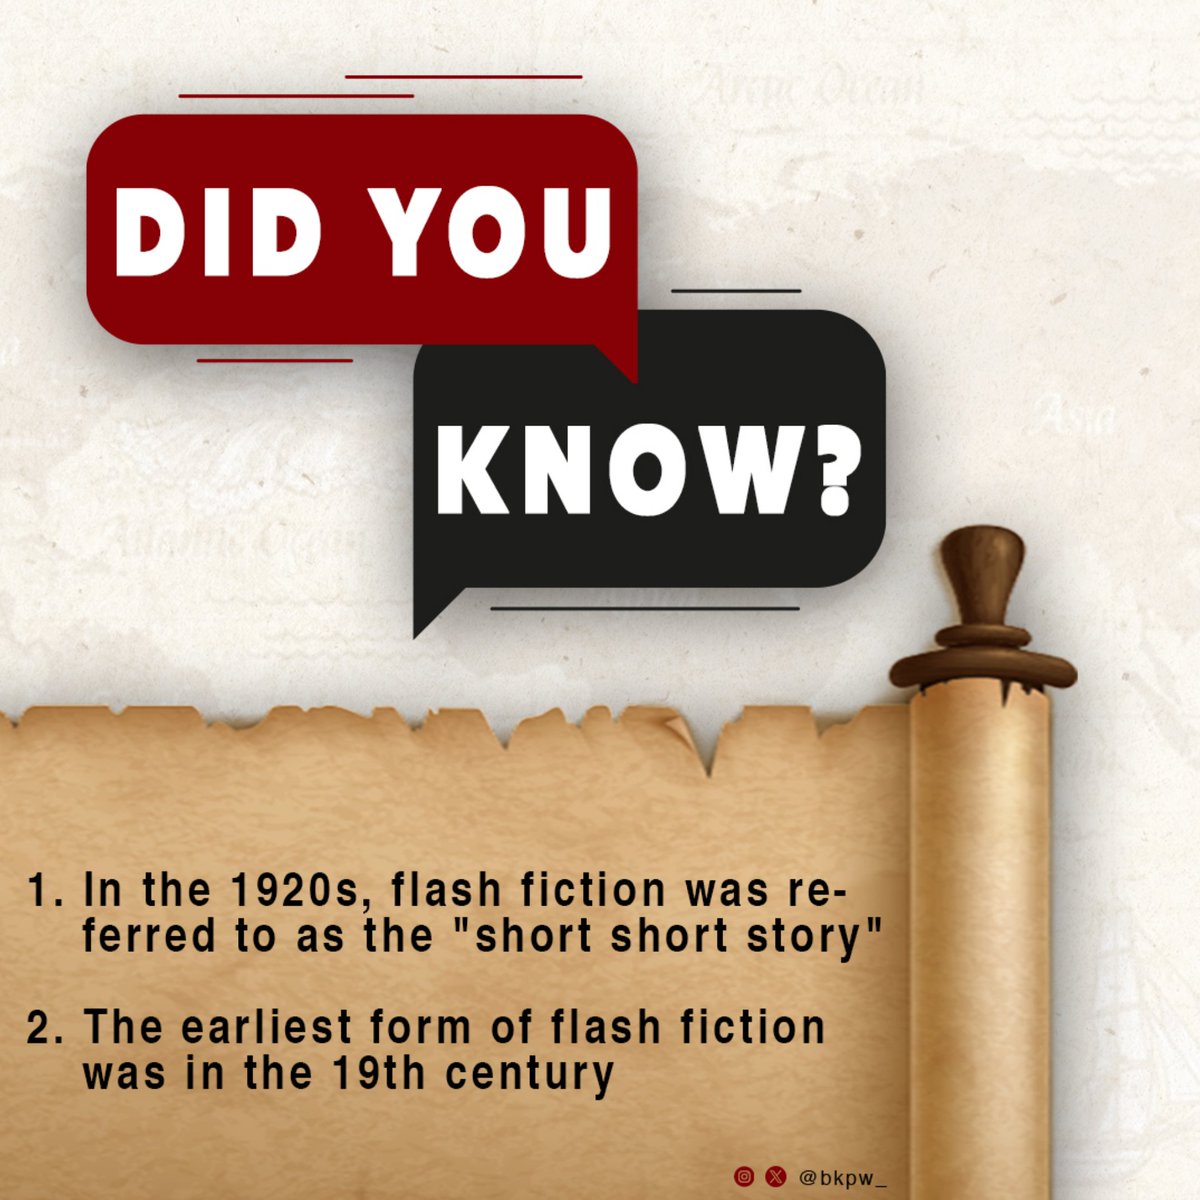 Flash Fiction Tuesday 

If flash fiction is a 'short short story,' it doesn't seem hard does it?
#DidYouKnow #flashfiction